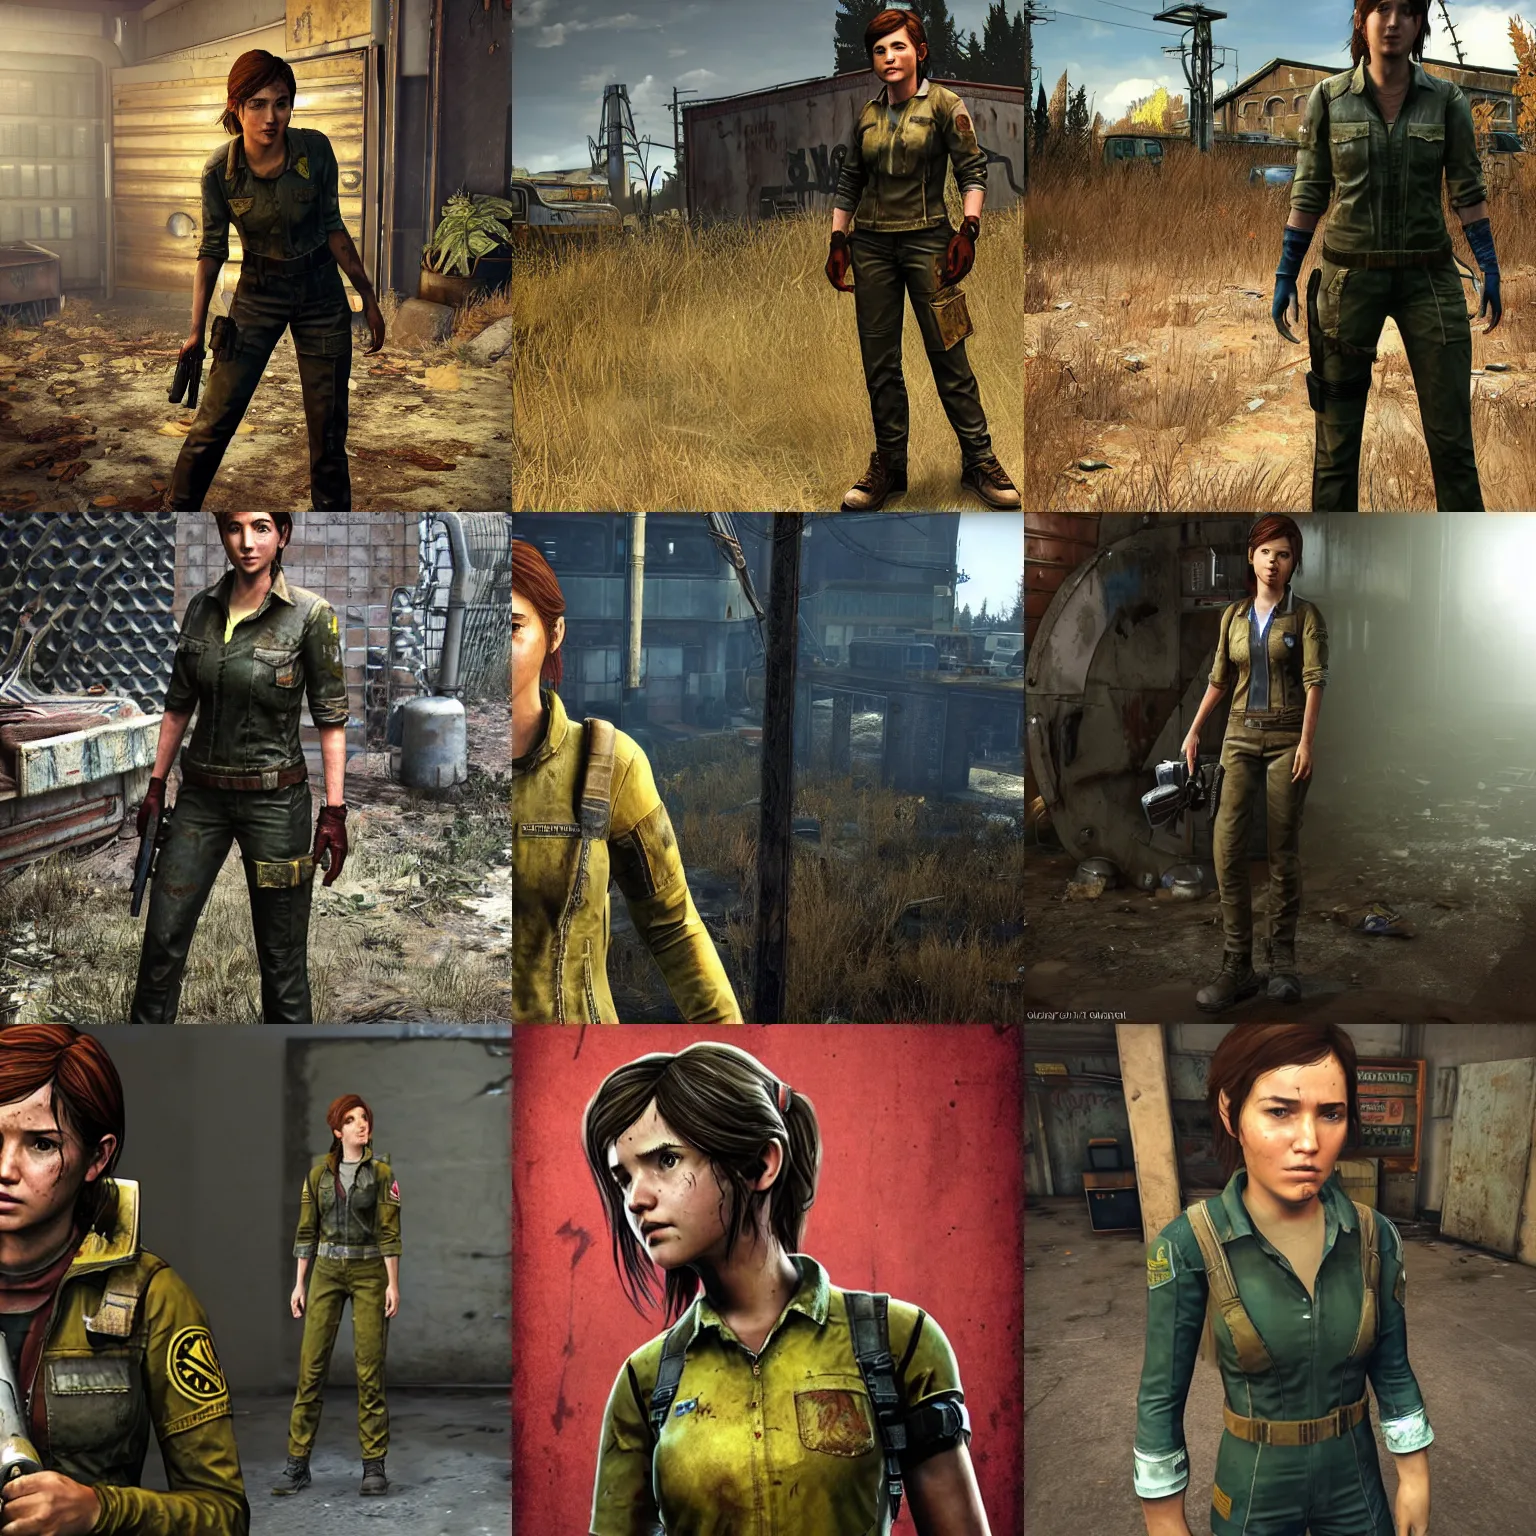 Prompt: Ellie from The Last of Us as vault dweller, wearing a vault suit, character from Fallout 4